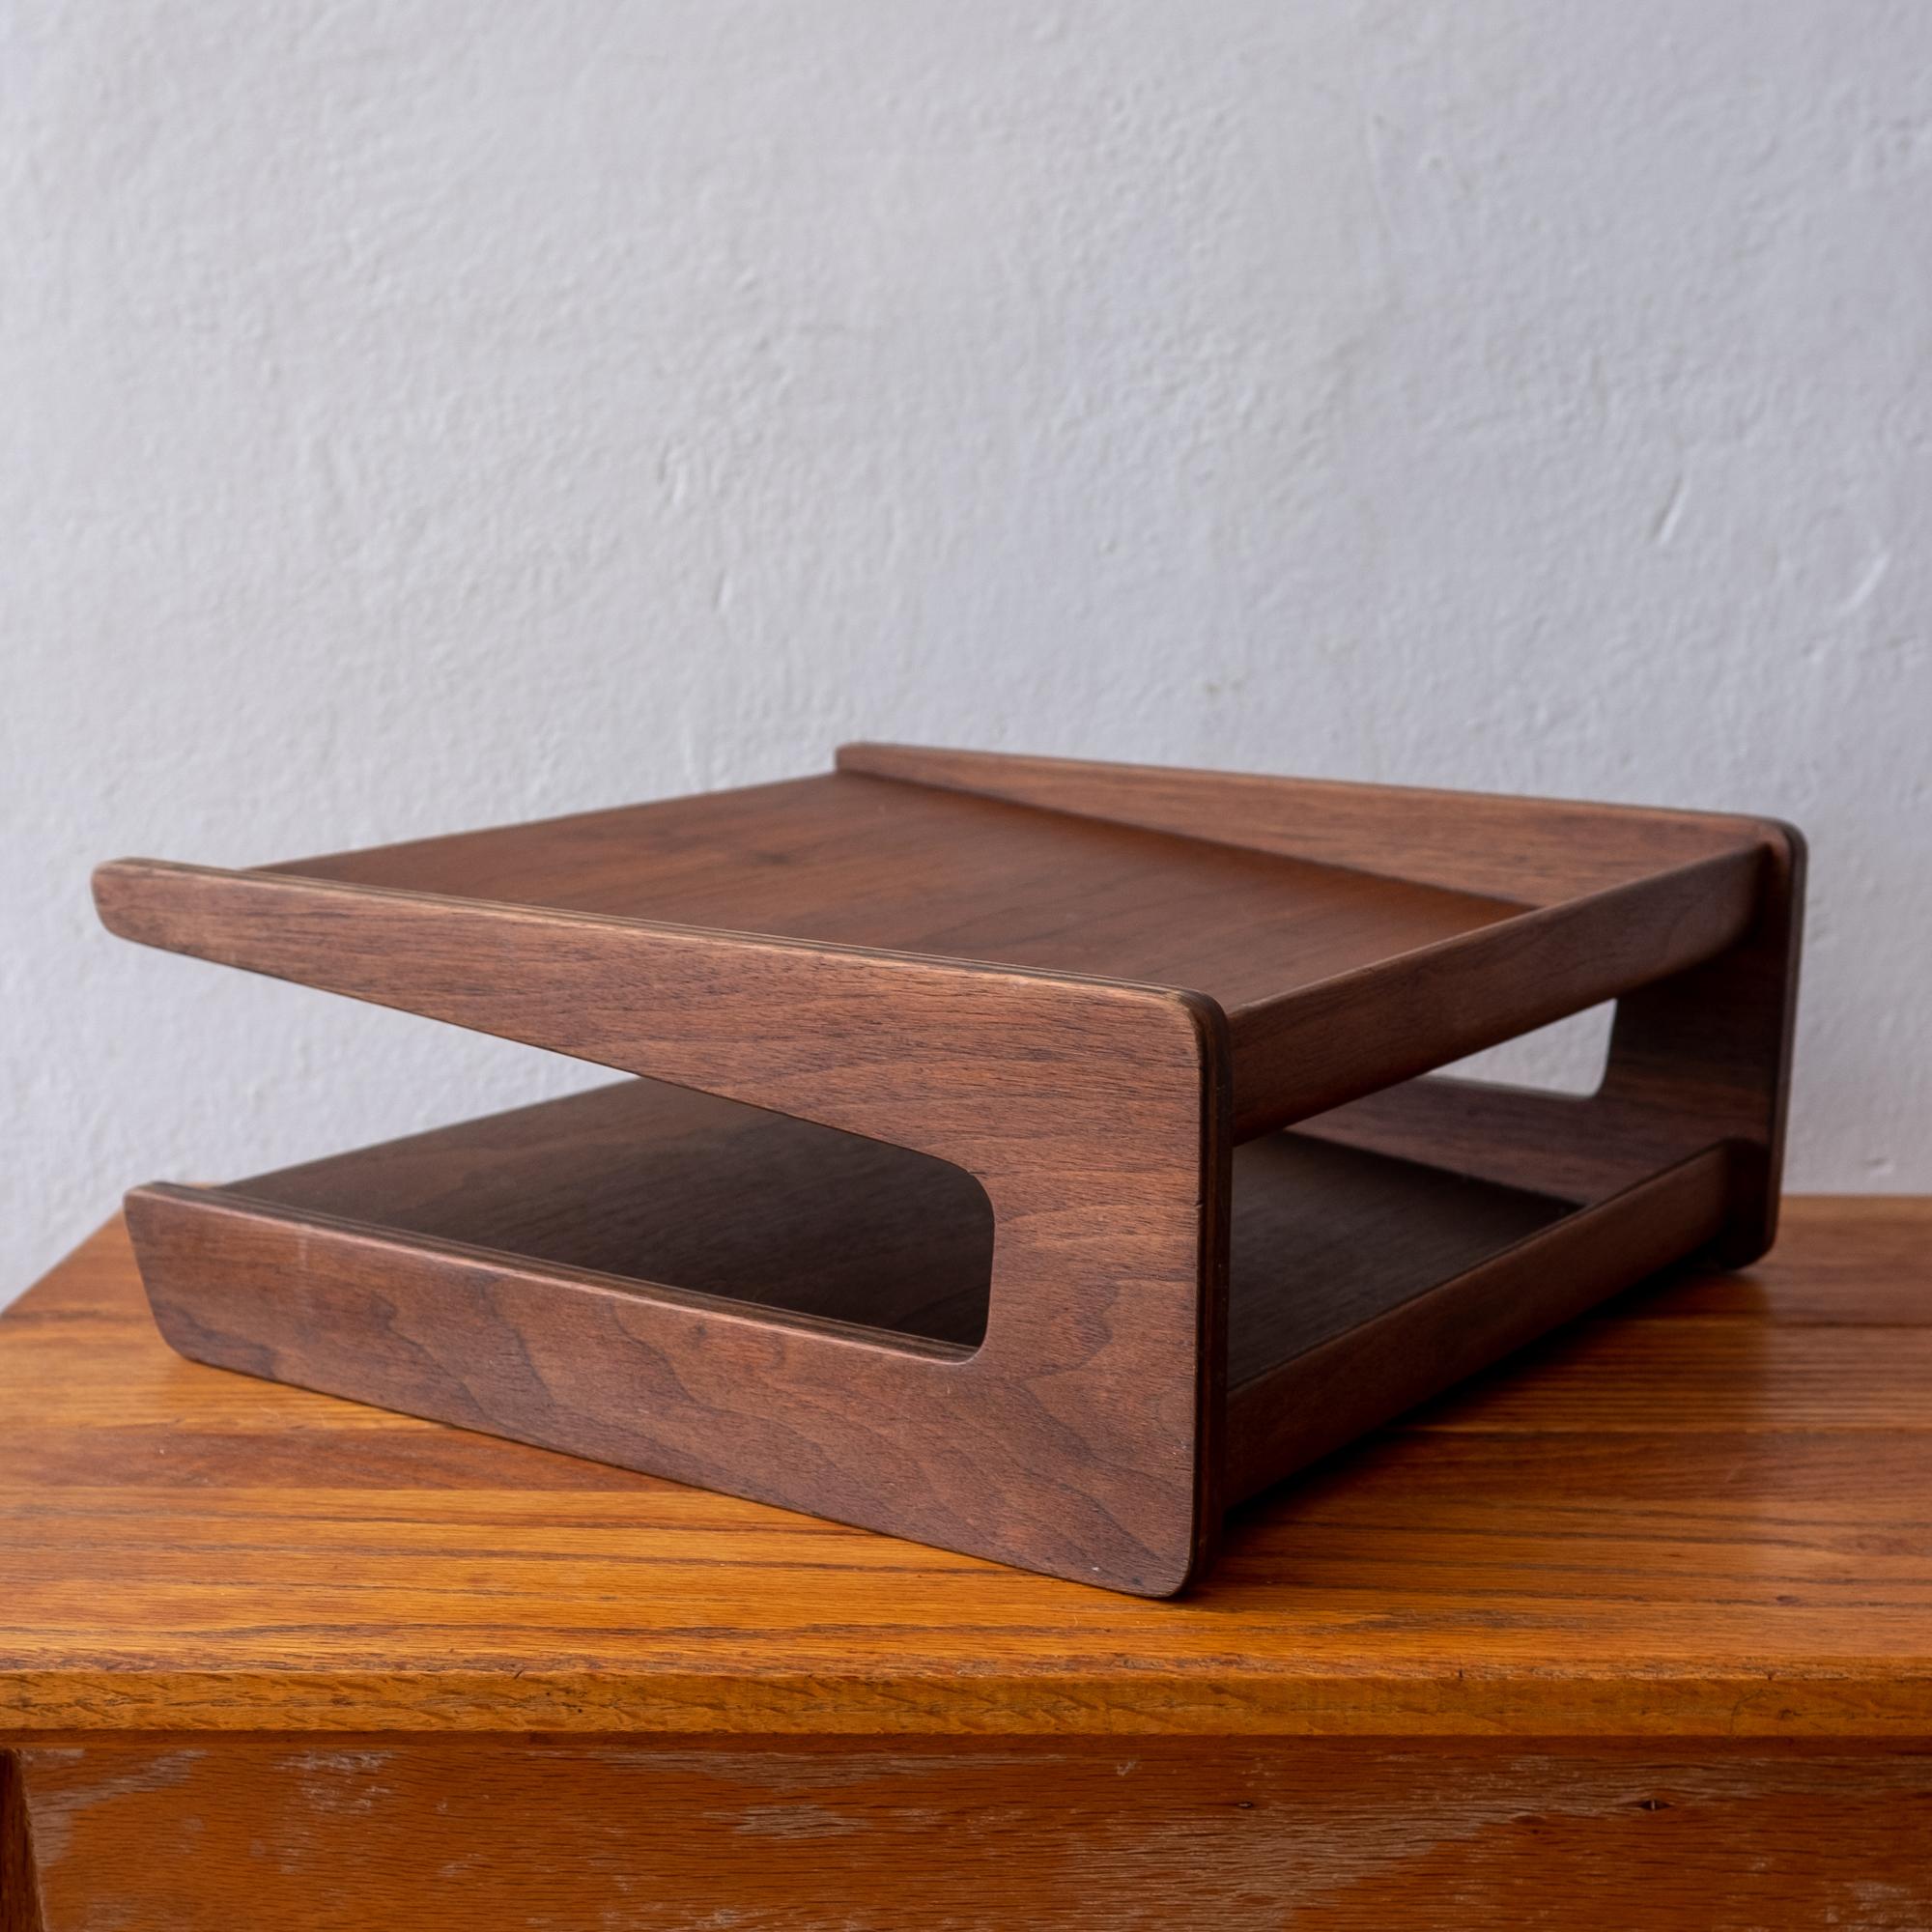 Bentply American walnut letter tray from the 1950s. A great modernist design with curved elements.